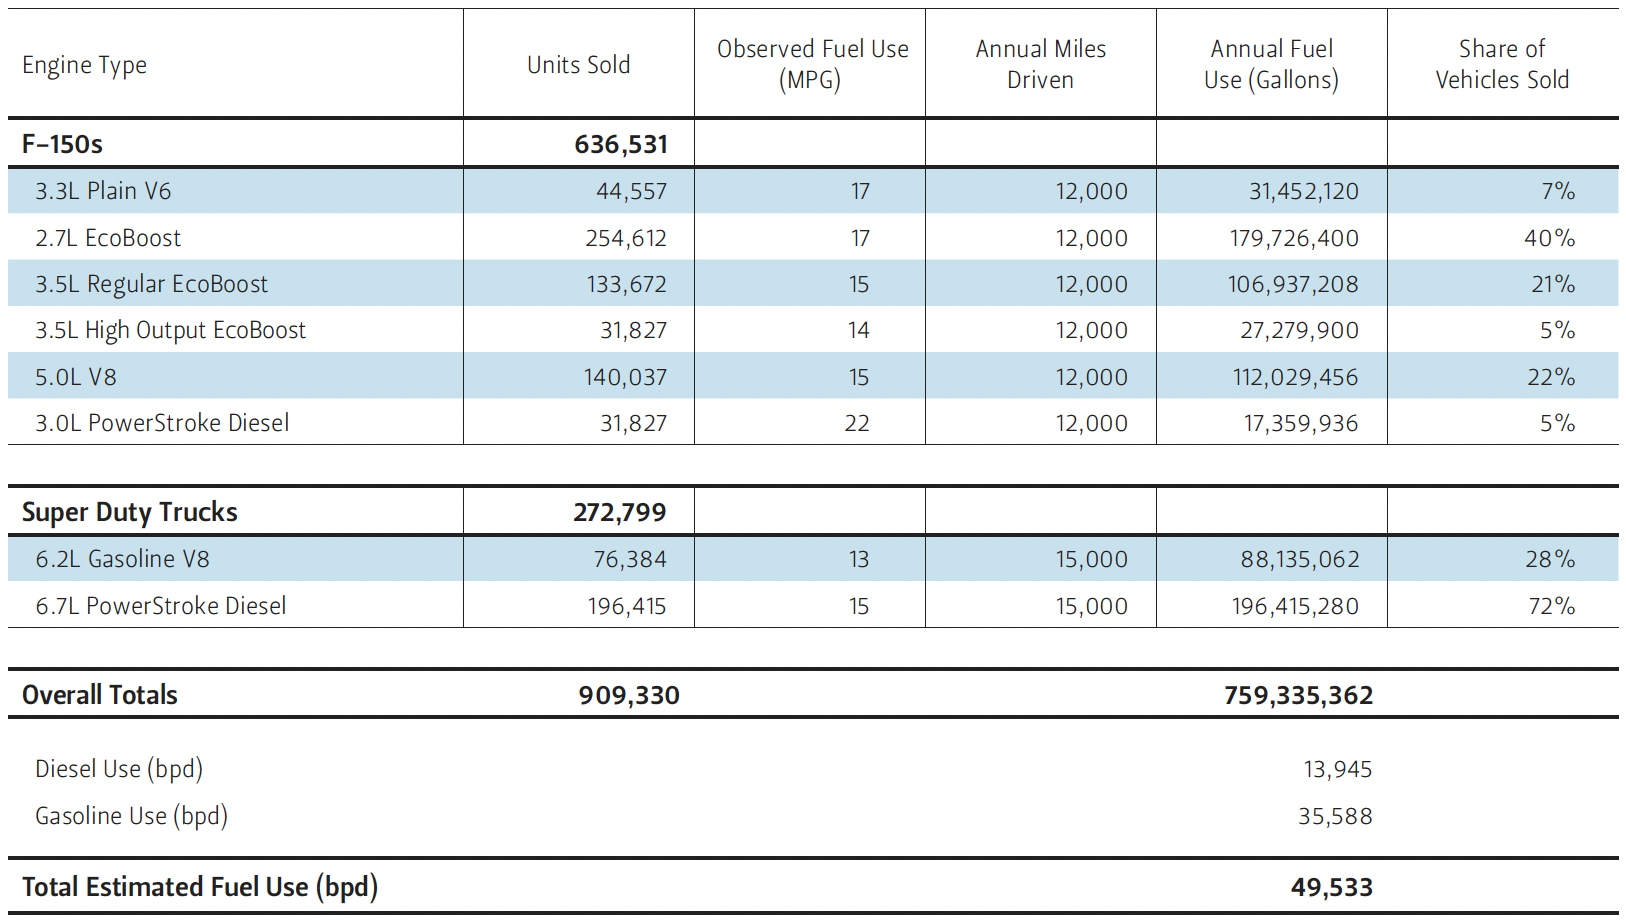 This table shows the estimated daily fuel use of Ford F-Series trucks sold in 2018.